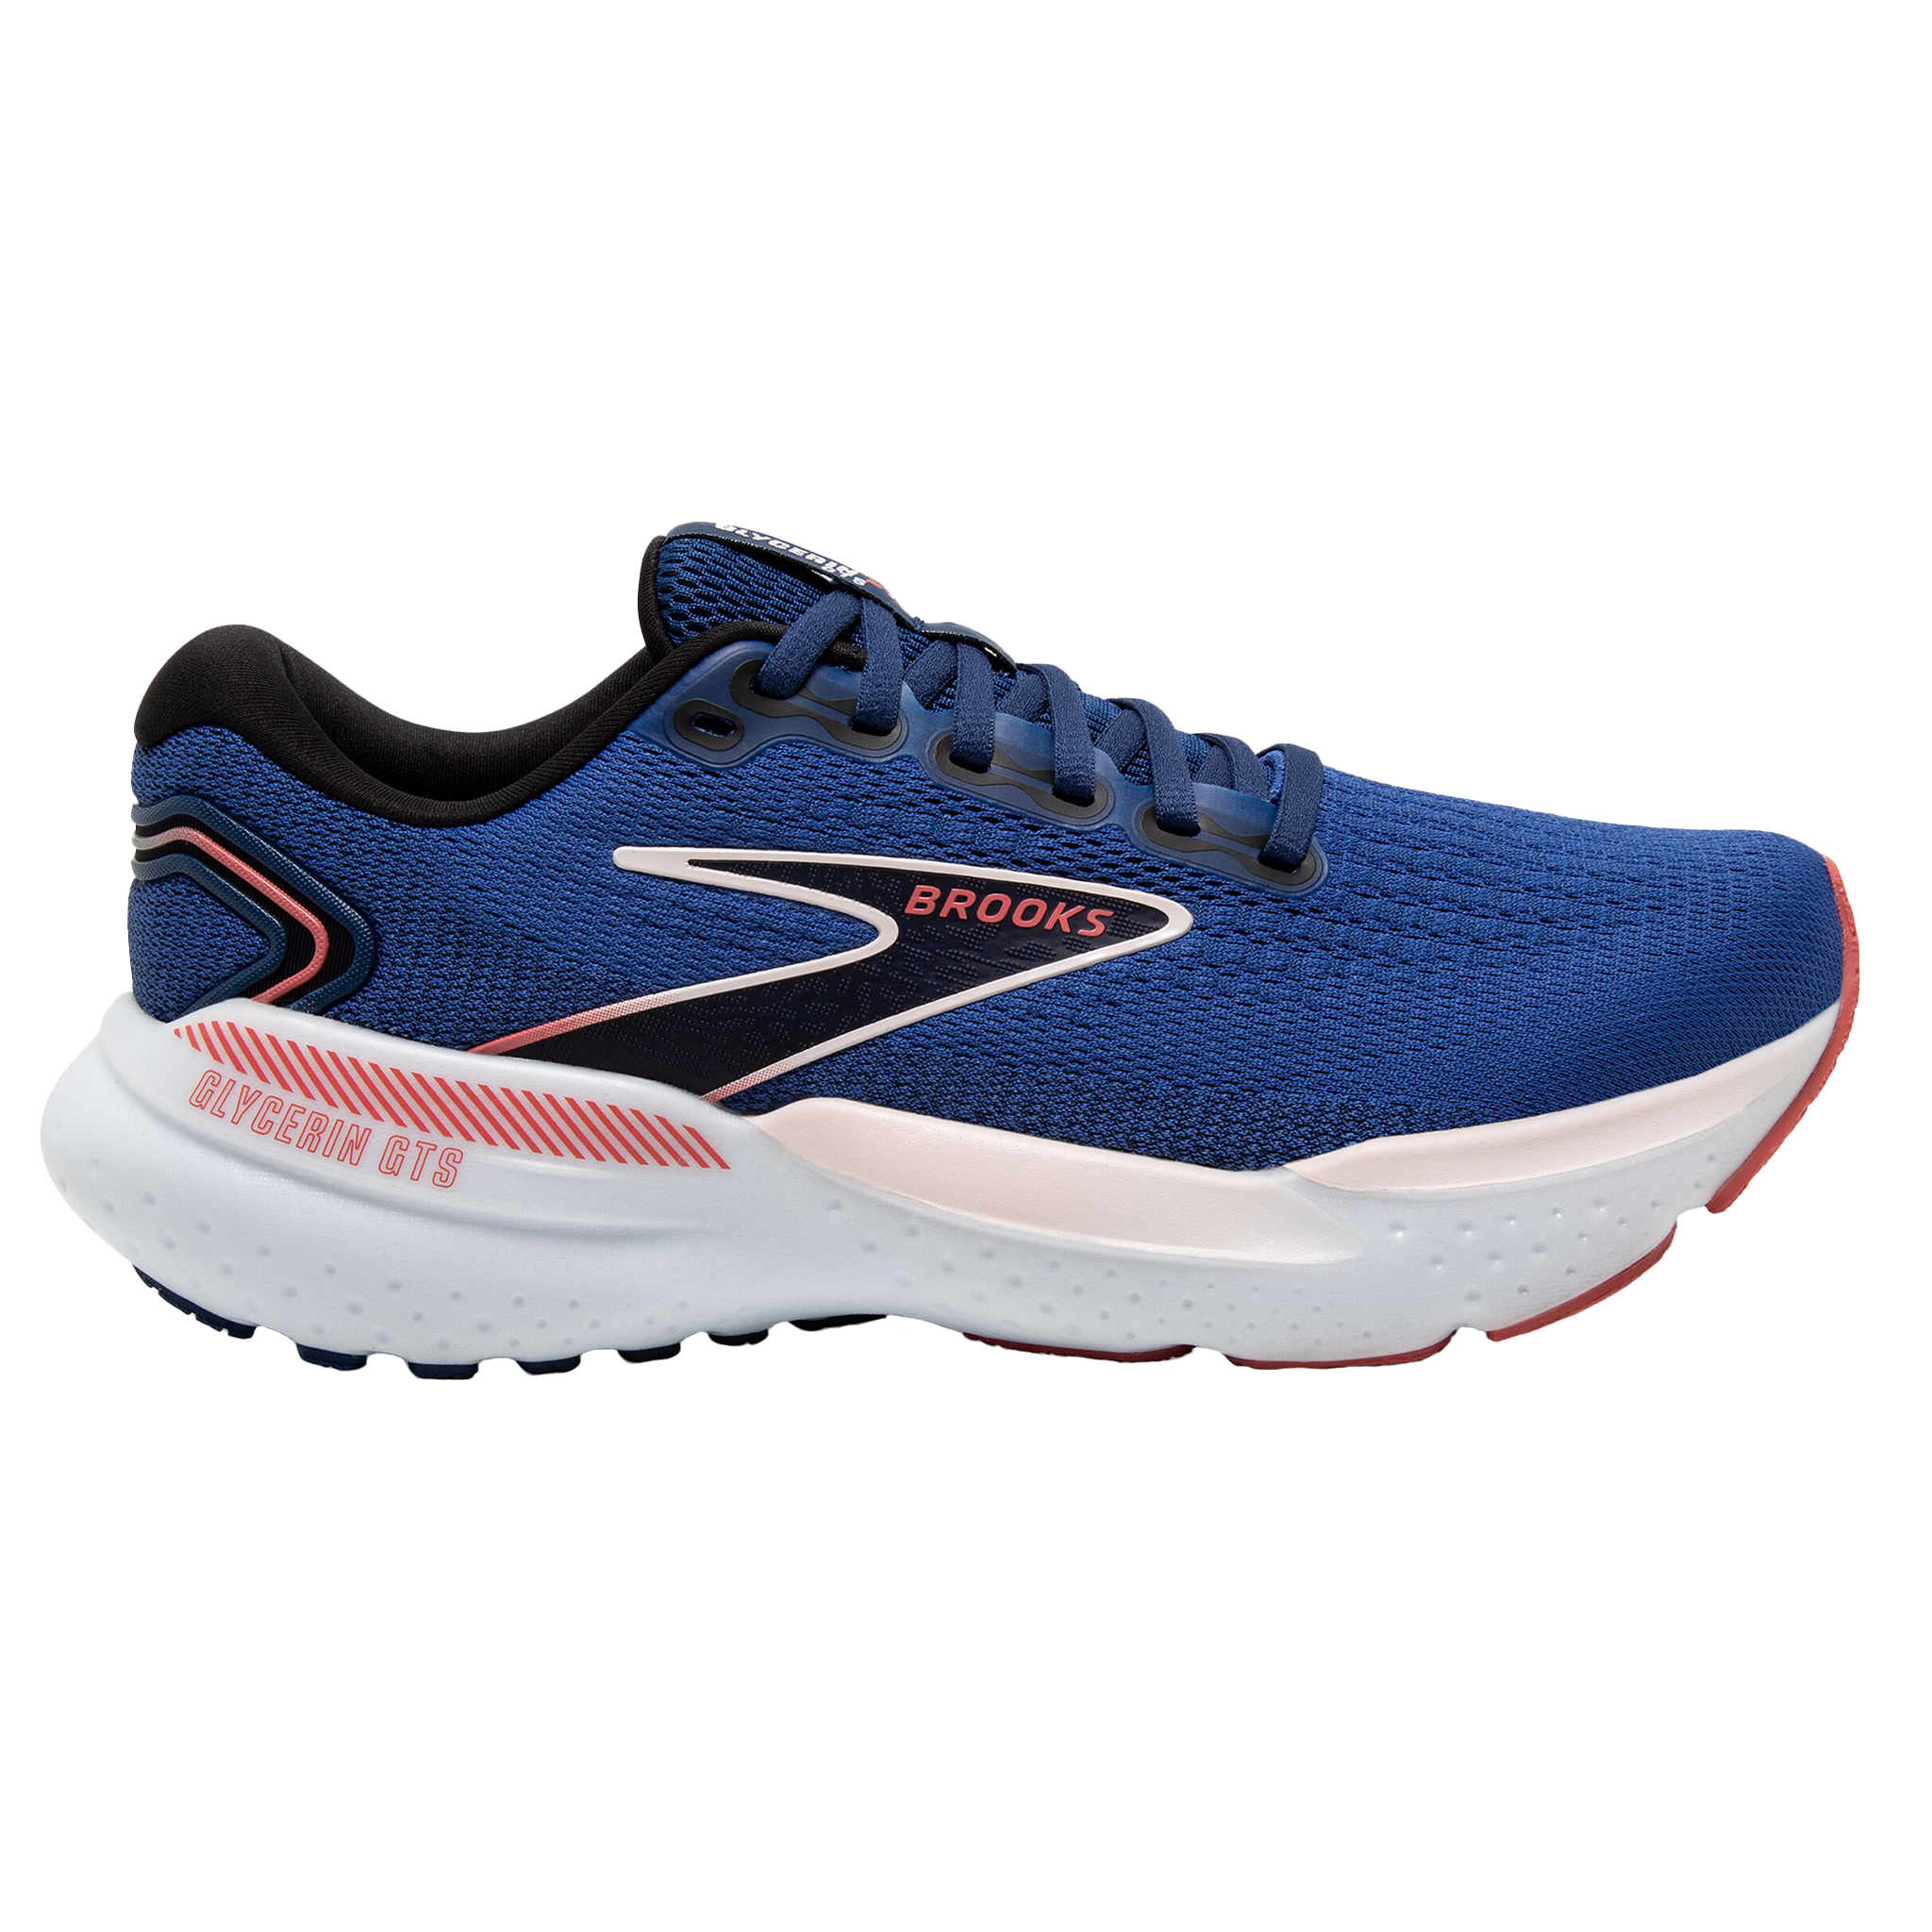 Brooks Womens Glycerin GTS 21 - Blue/Icy Pink/Rose - Stability